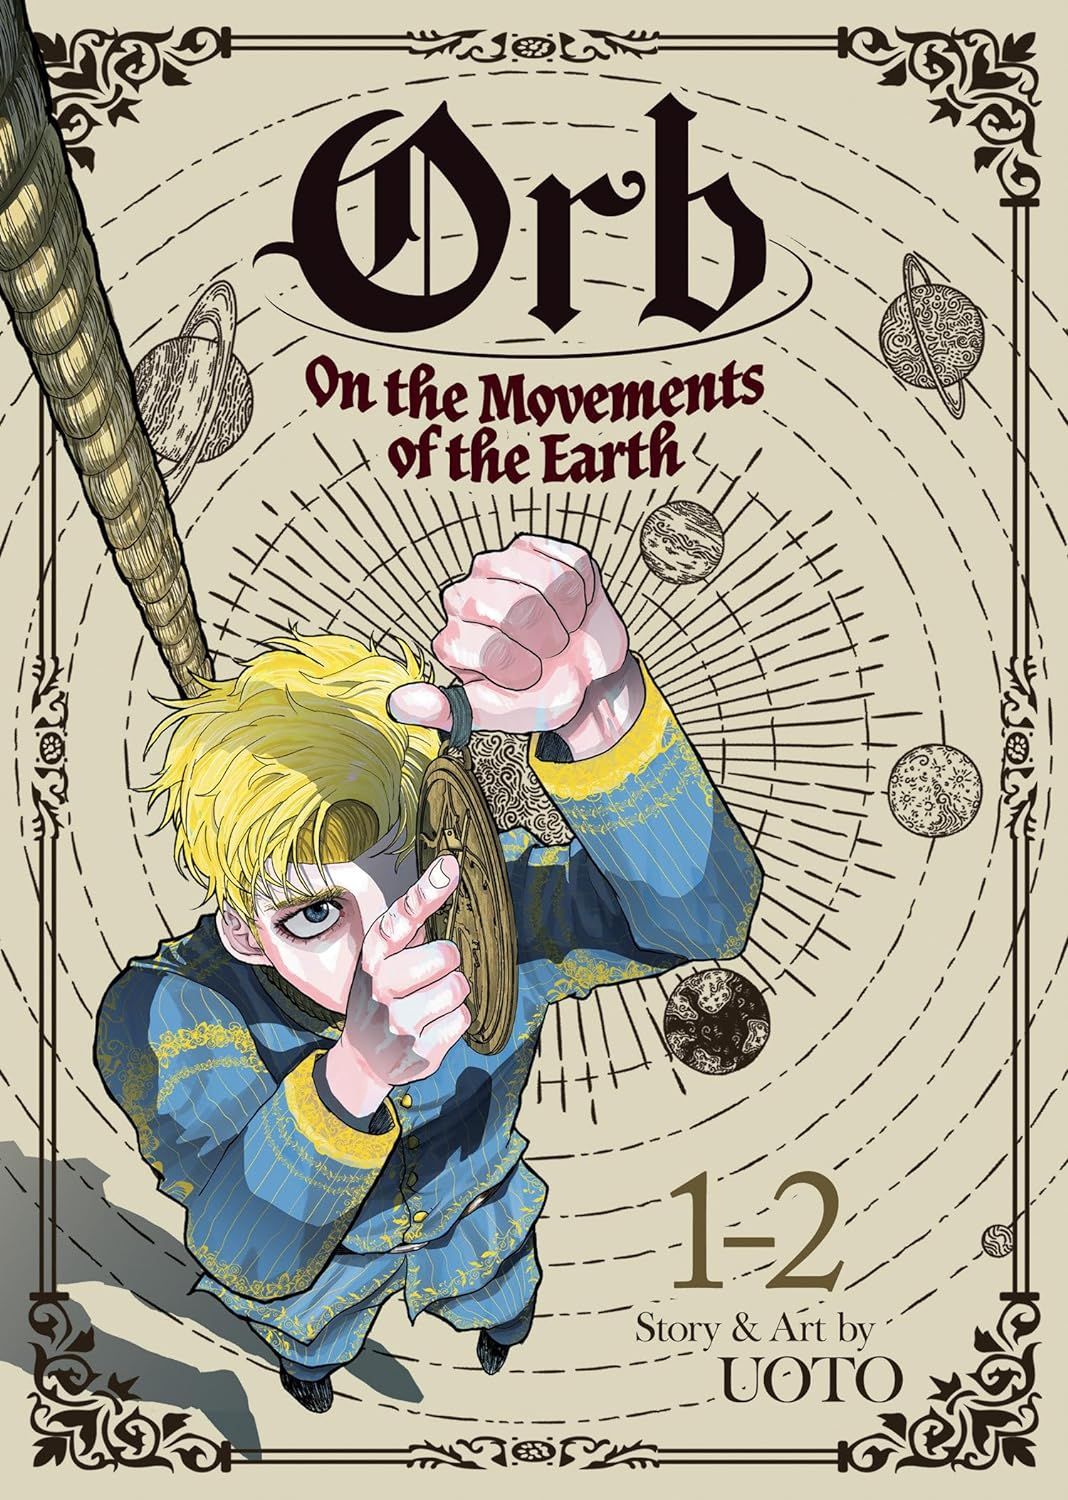 Orb: On the Movements of the Earth by Uoto cover